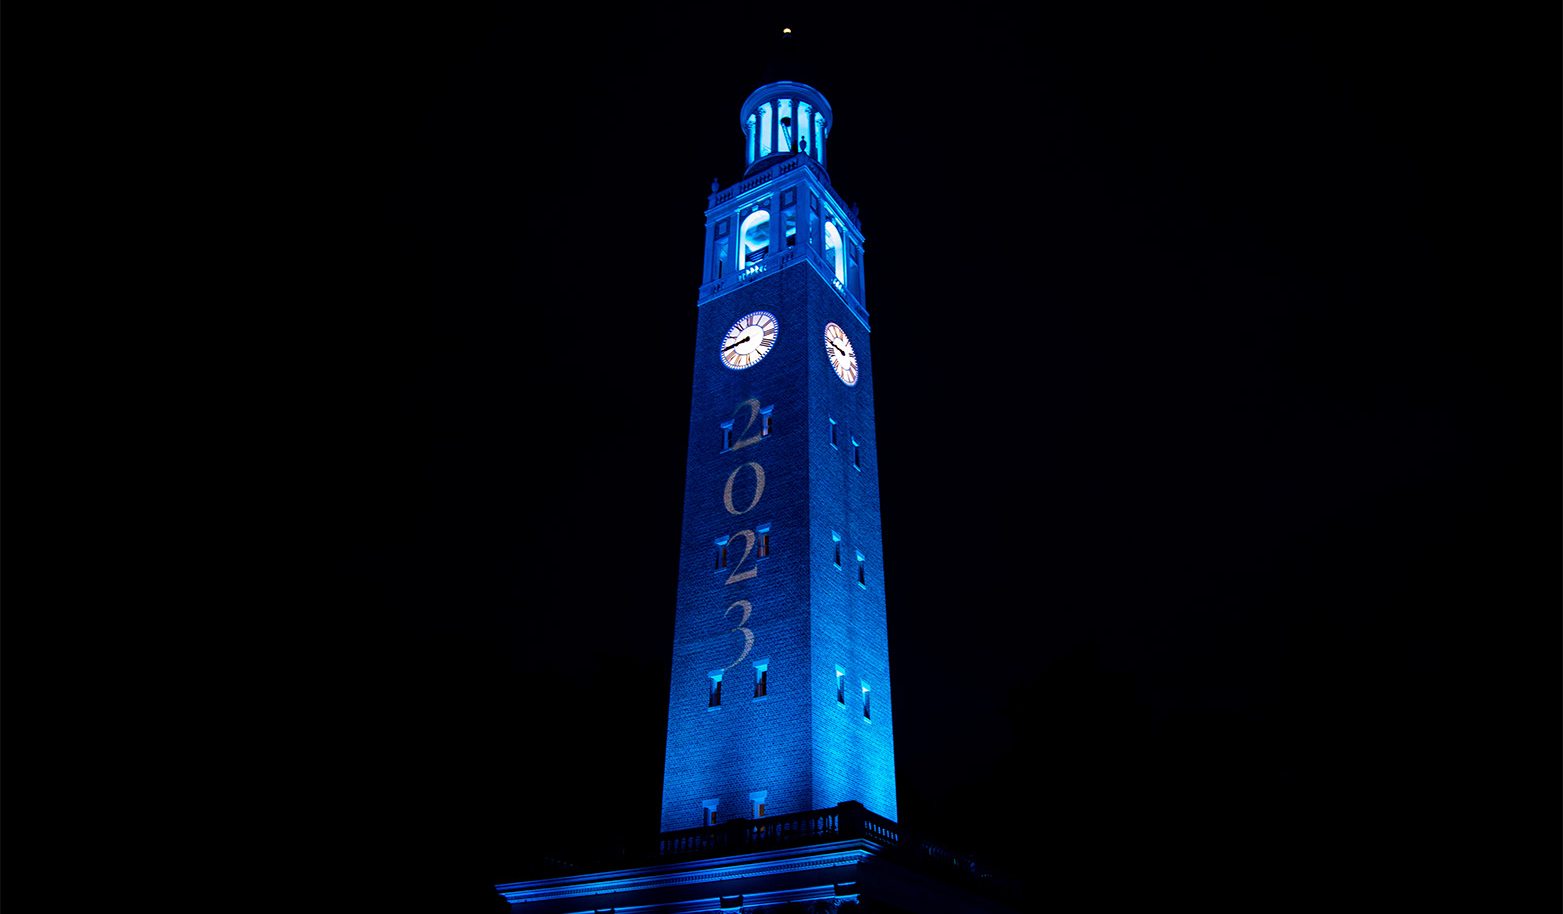 The Bell Tower lit up in Carolina Blue.